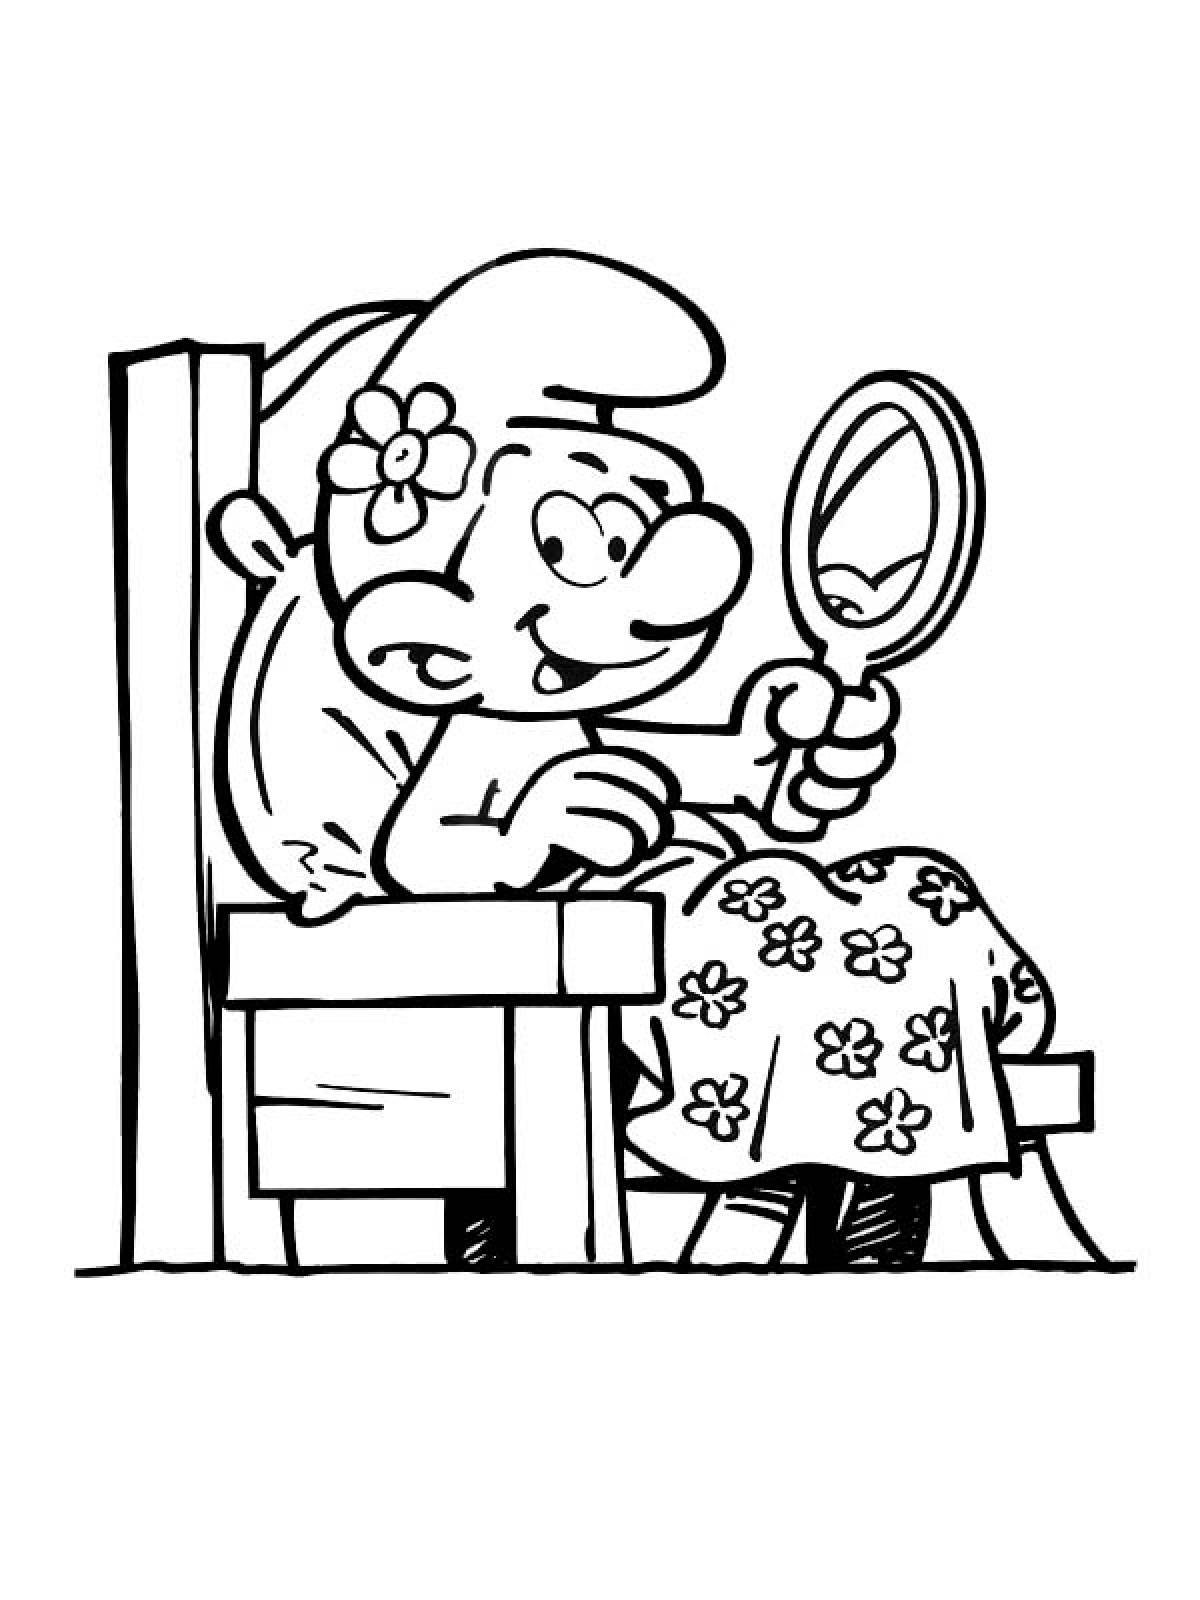 Photo Smurfs coloring pages